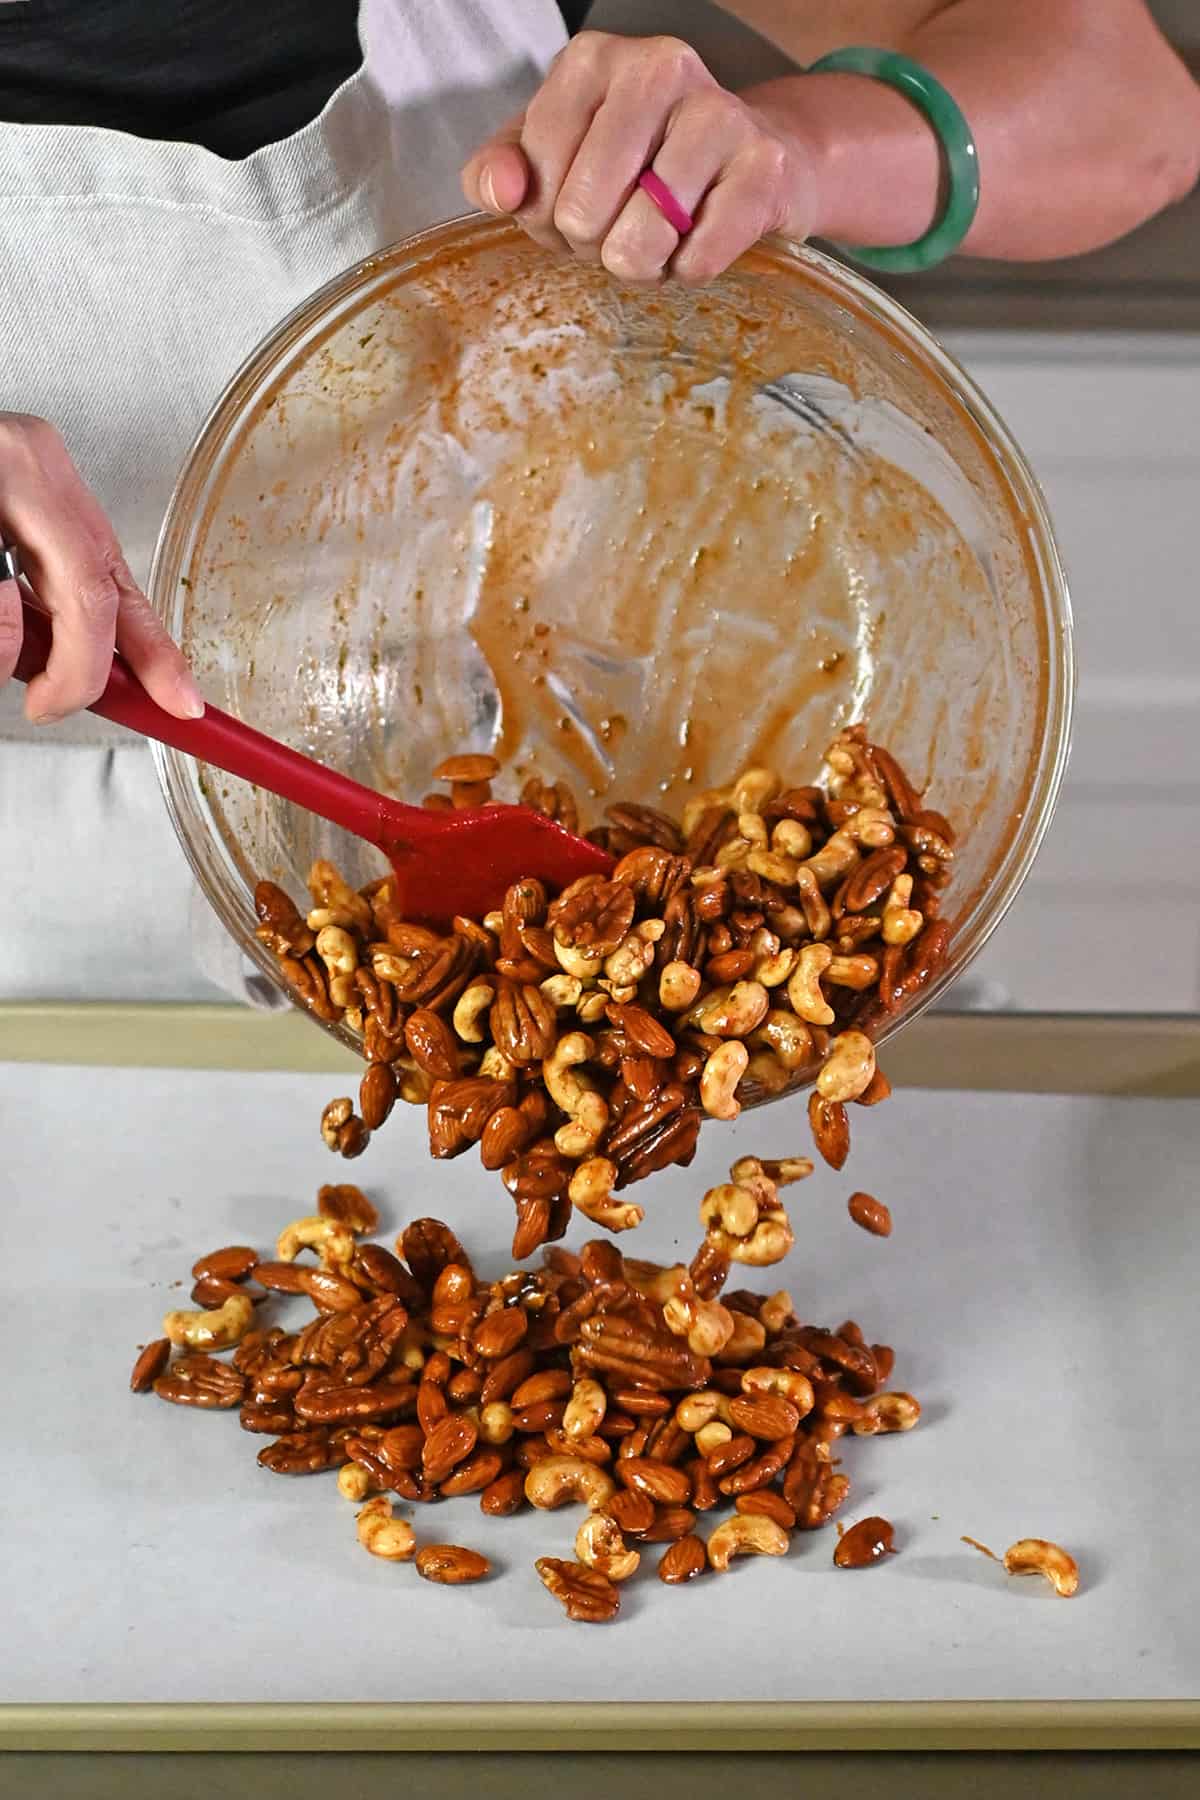 Transferring the seasoned nuts from a large glass mixing bowl to a parchment lined rimmed baking sheet.